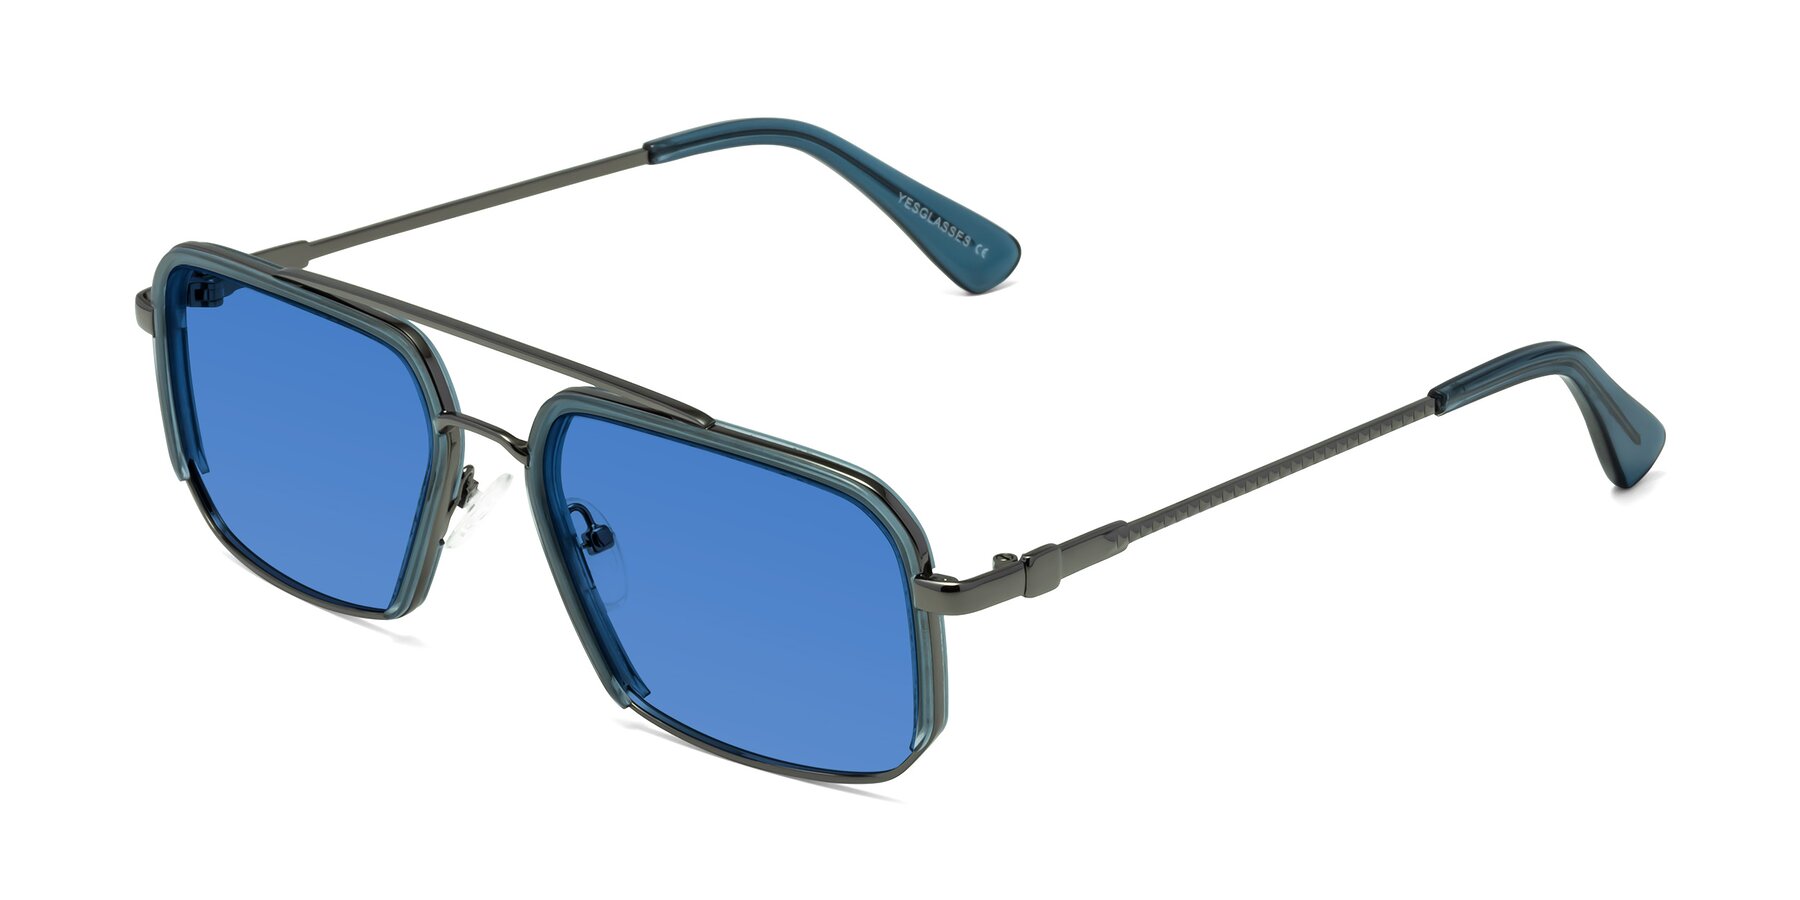 Angle of Dechter in Teal-Gunmetal with Blue Tinted Lenses